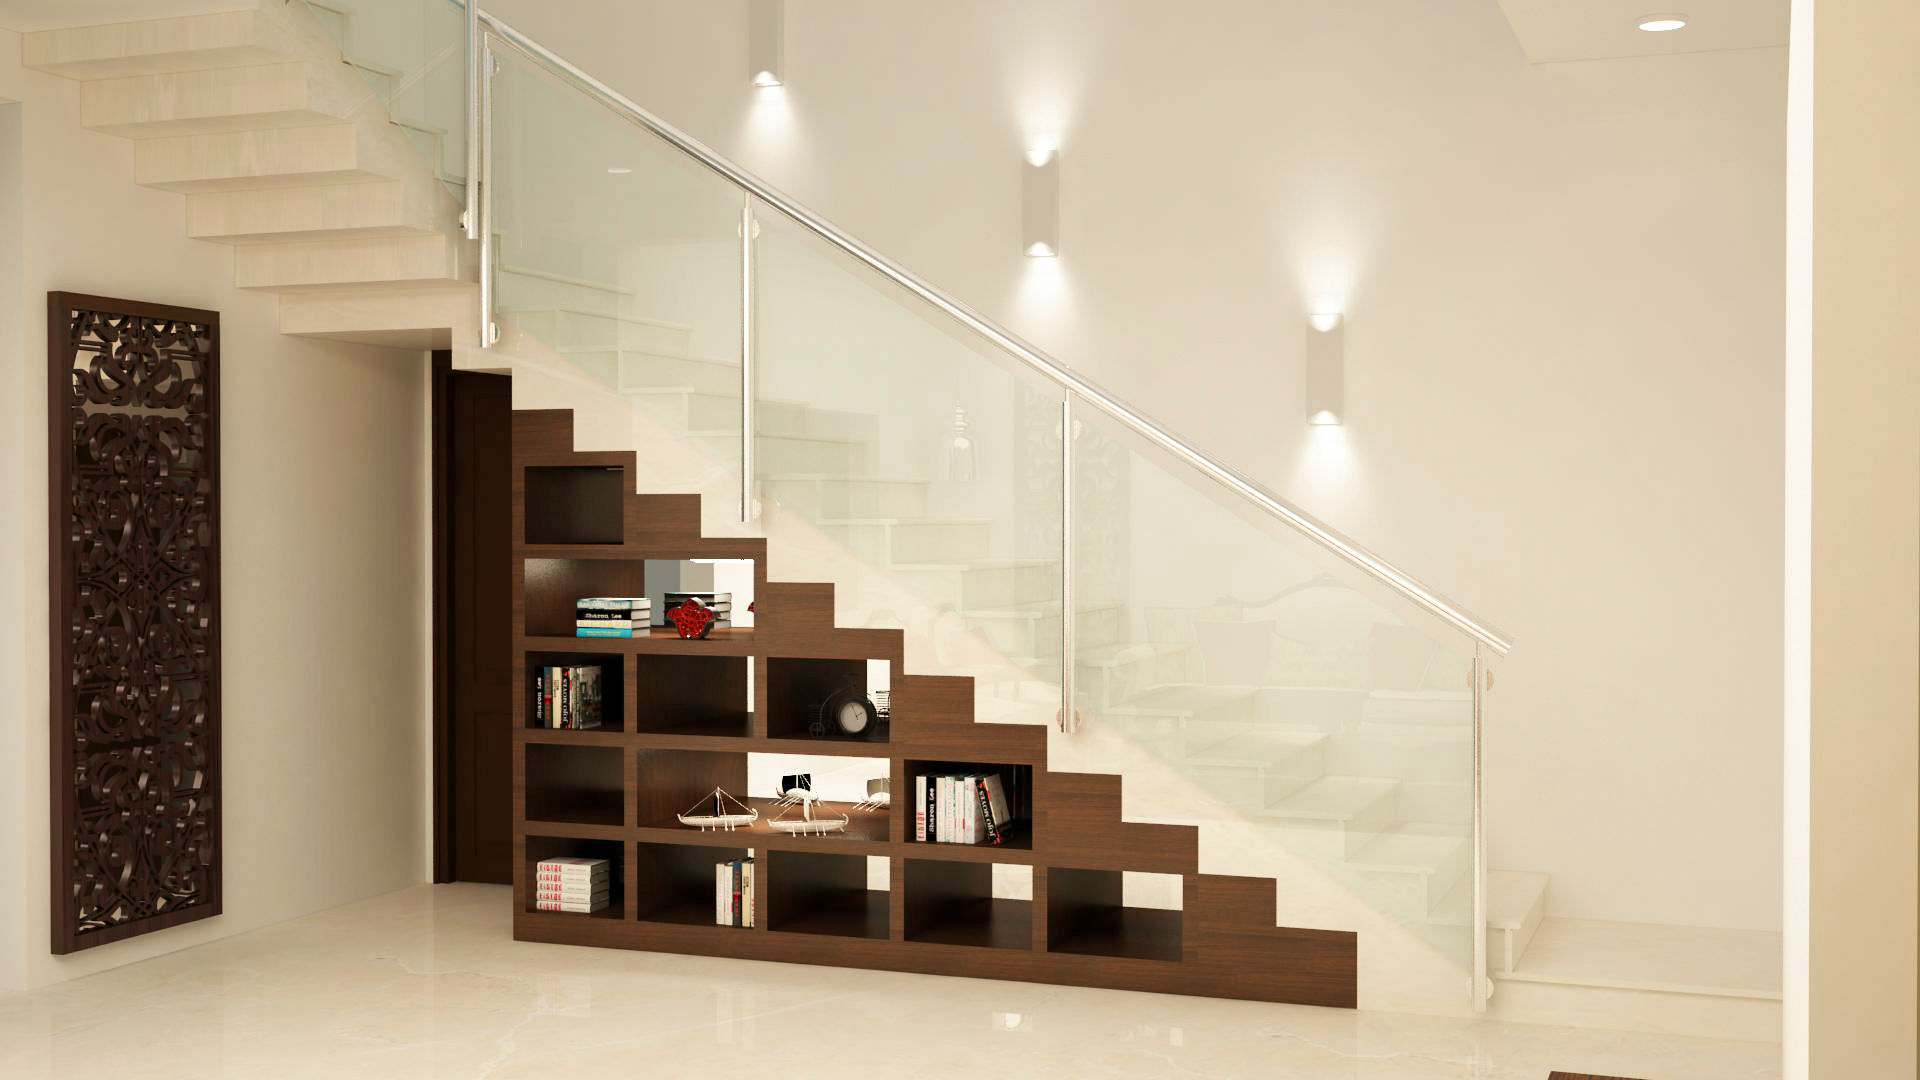 Stairs open display and storage homify Stairs